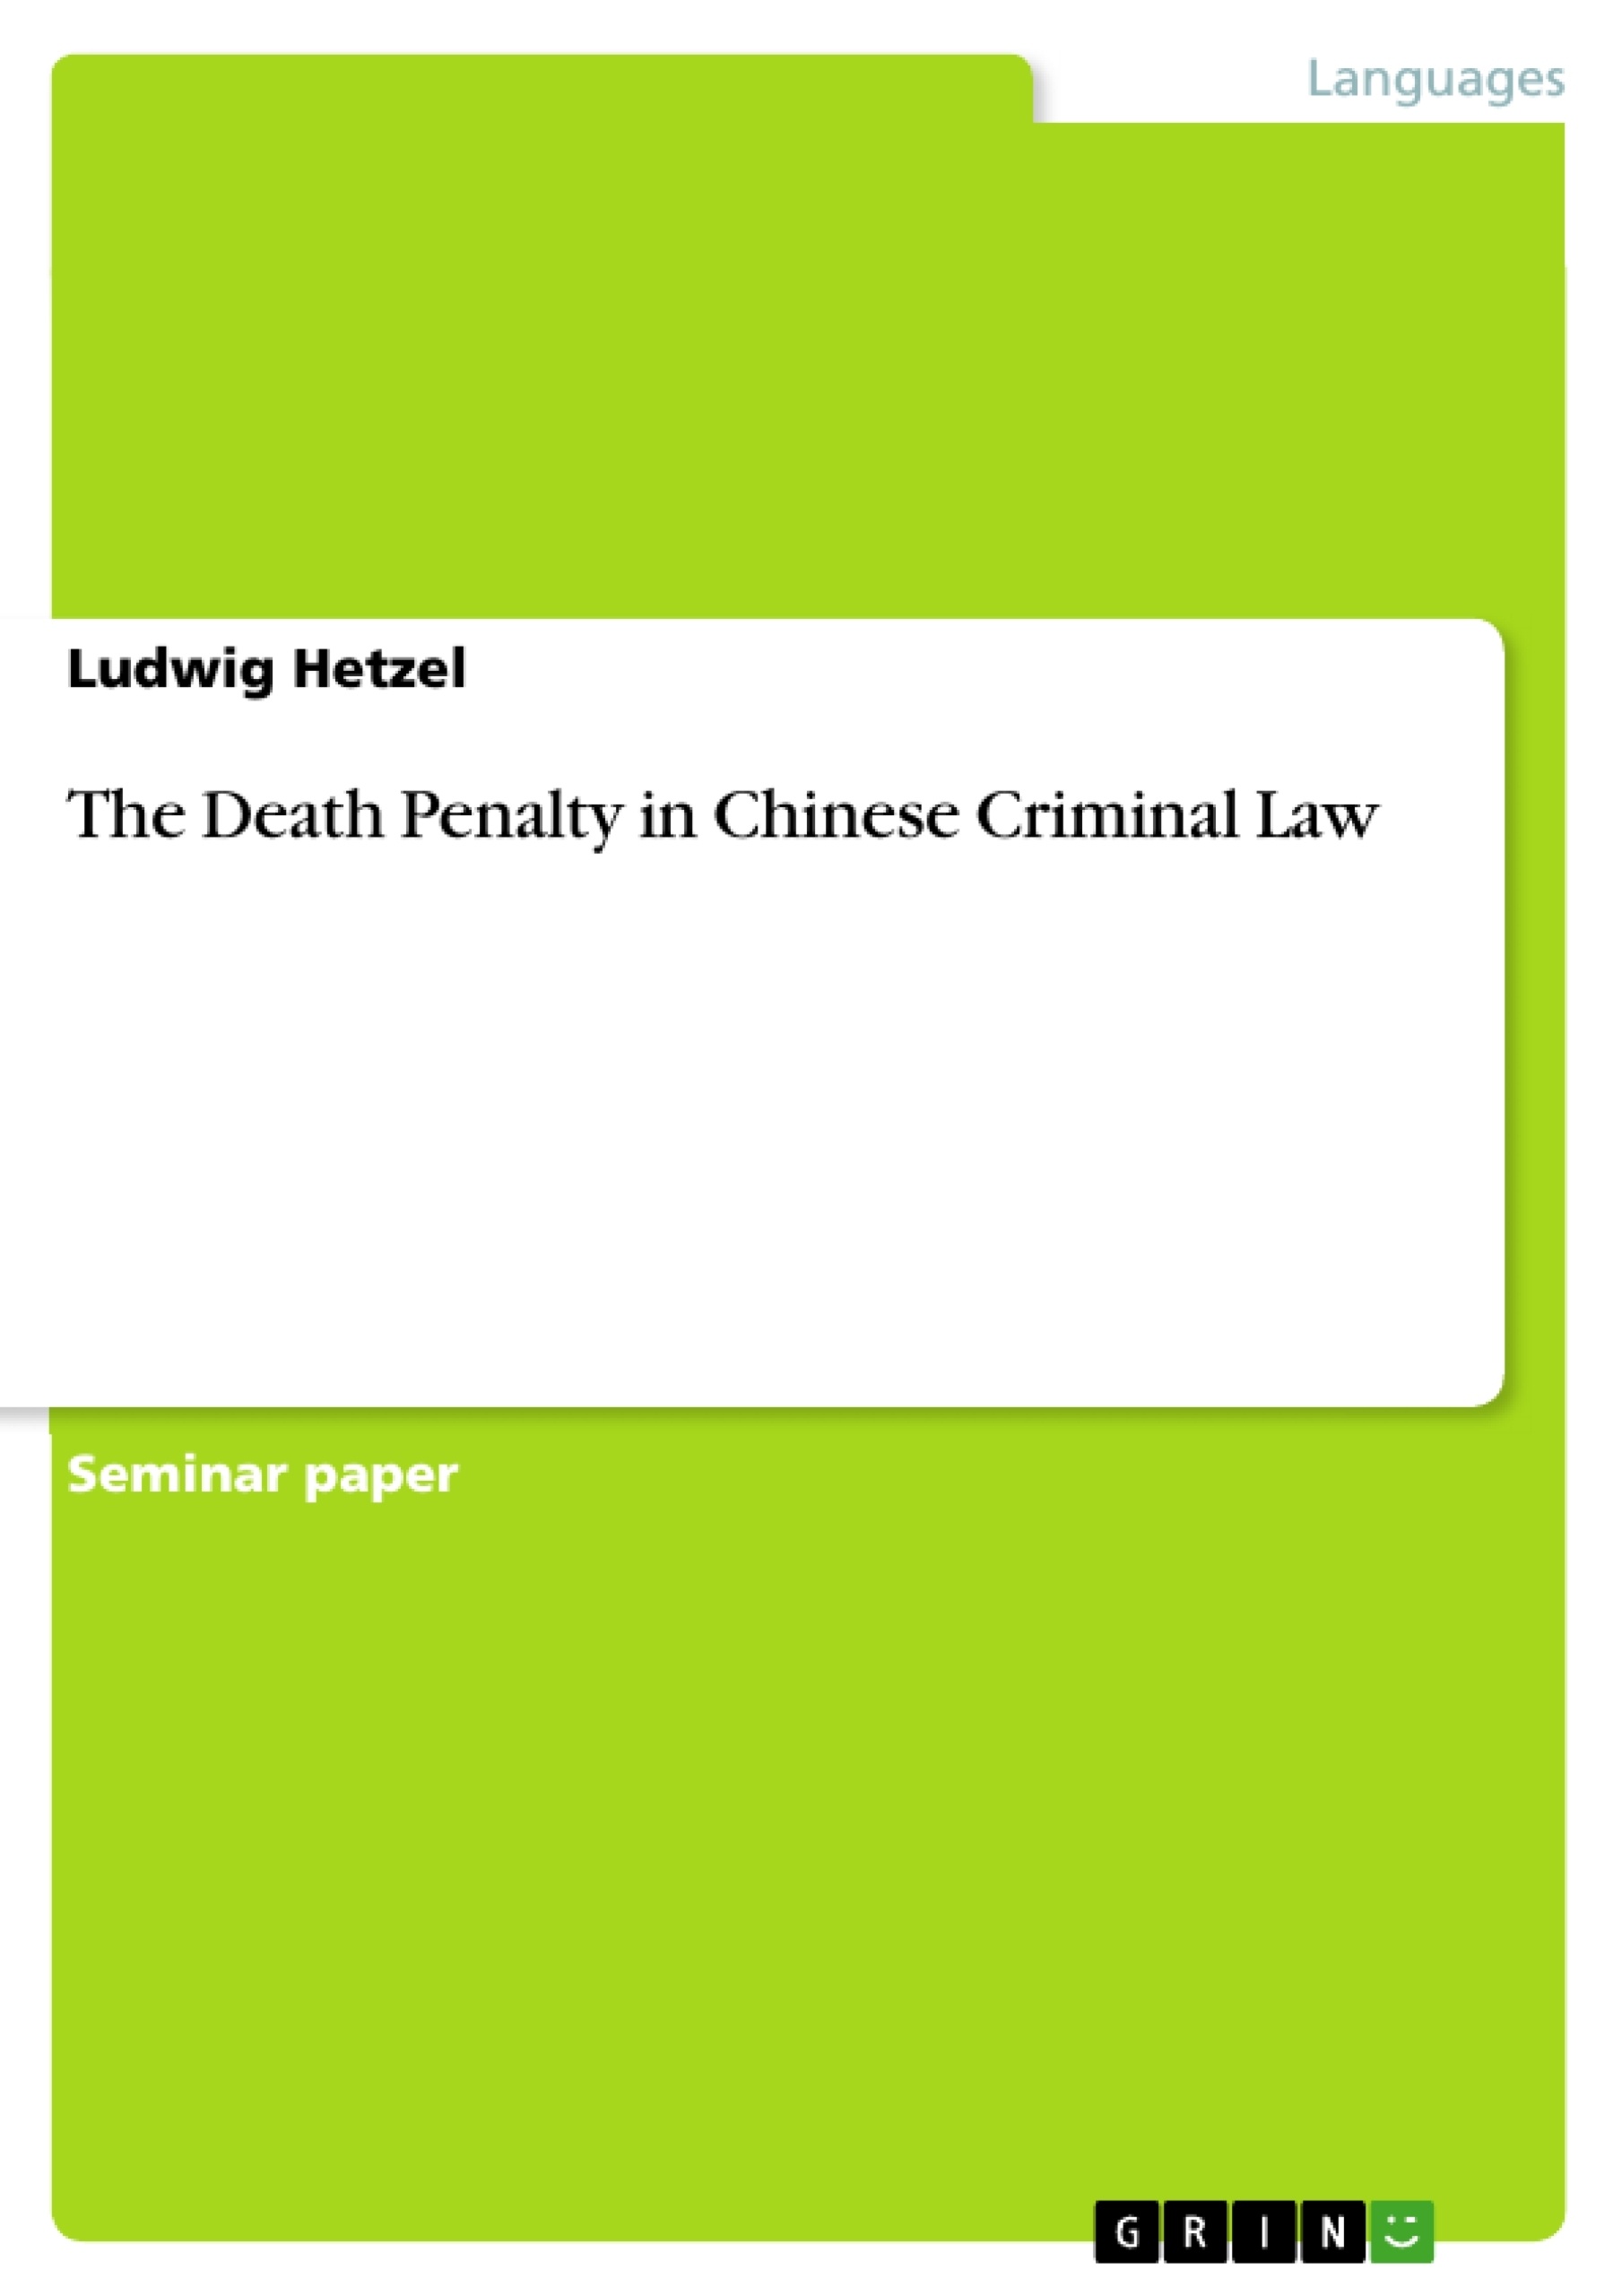 Title: The Death Penalty in Chinese Criminal Law